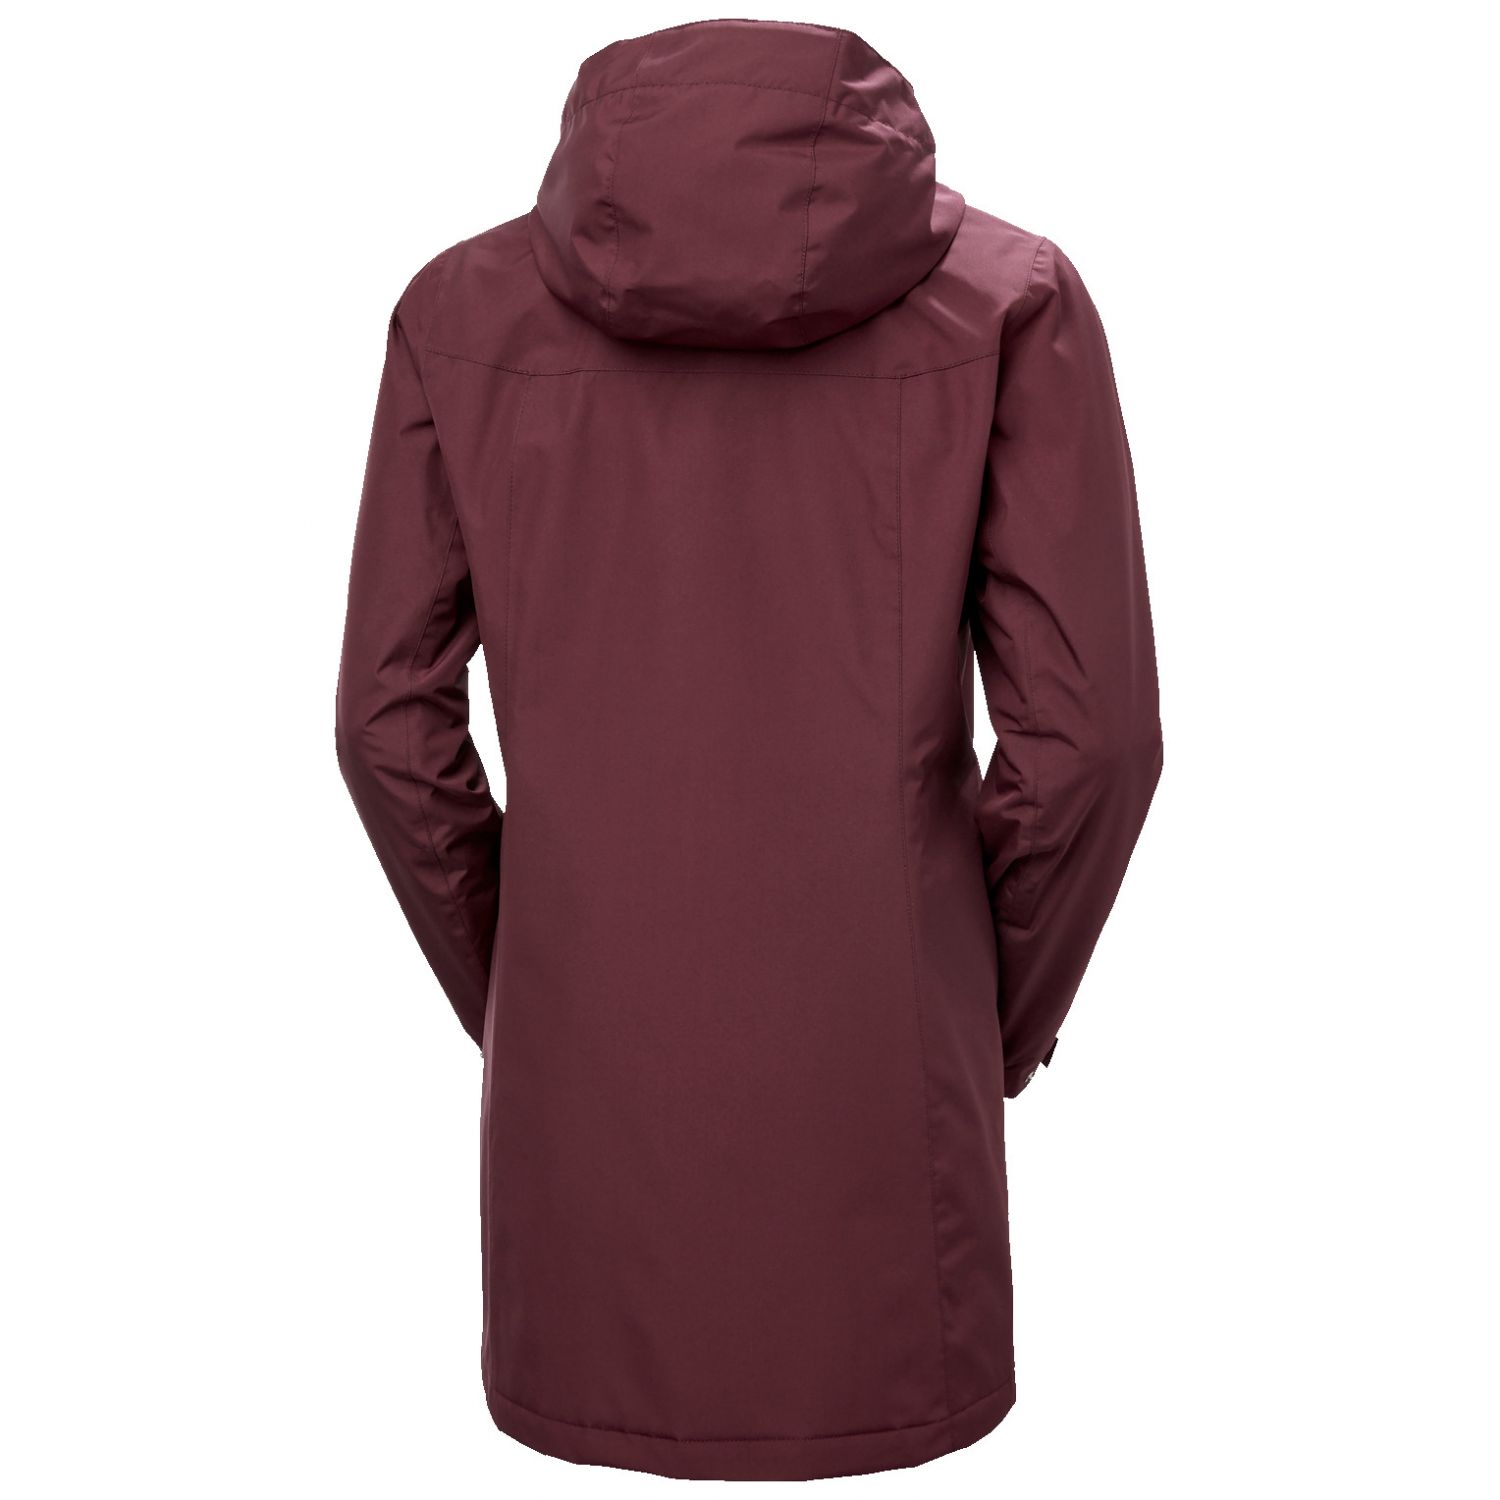 Helly Hansen Aden Insulated, Regnkåpe, Dame, Hickory